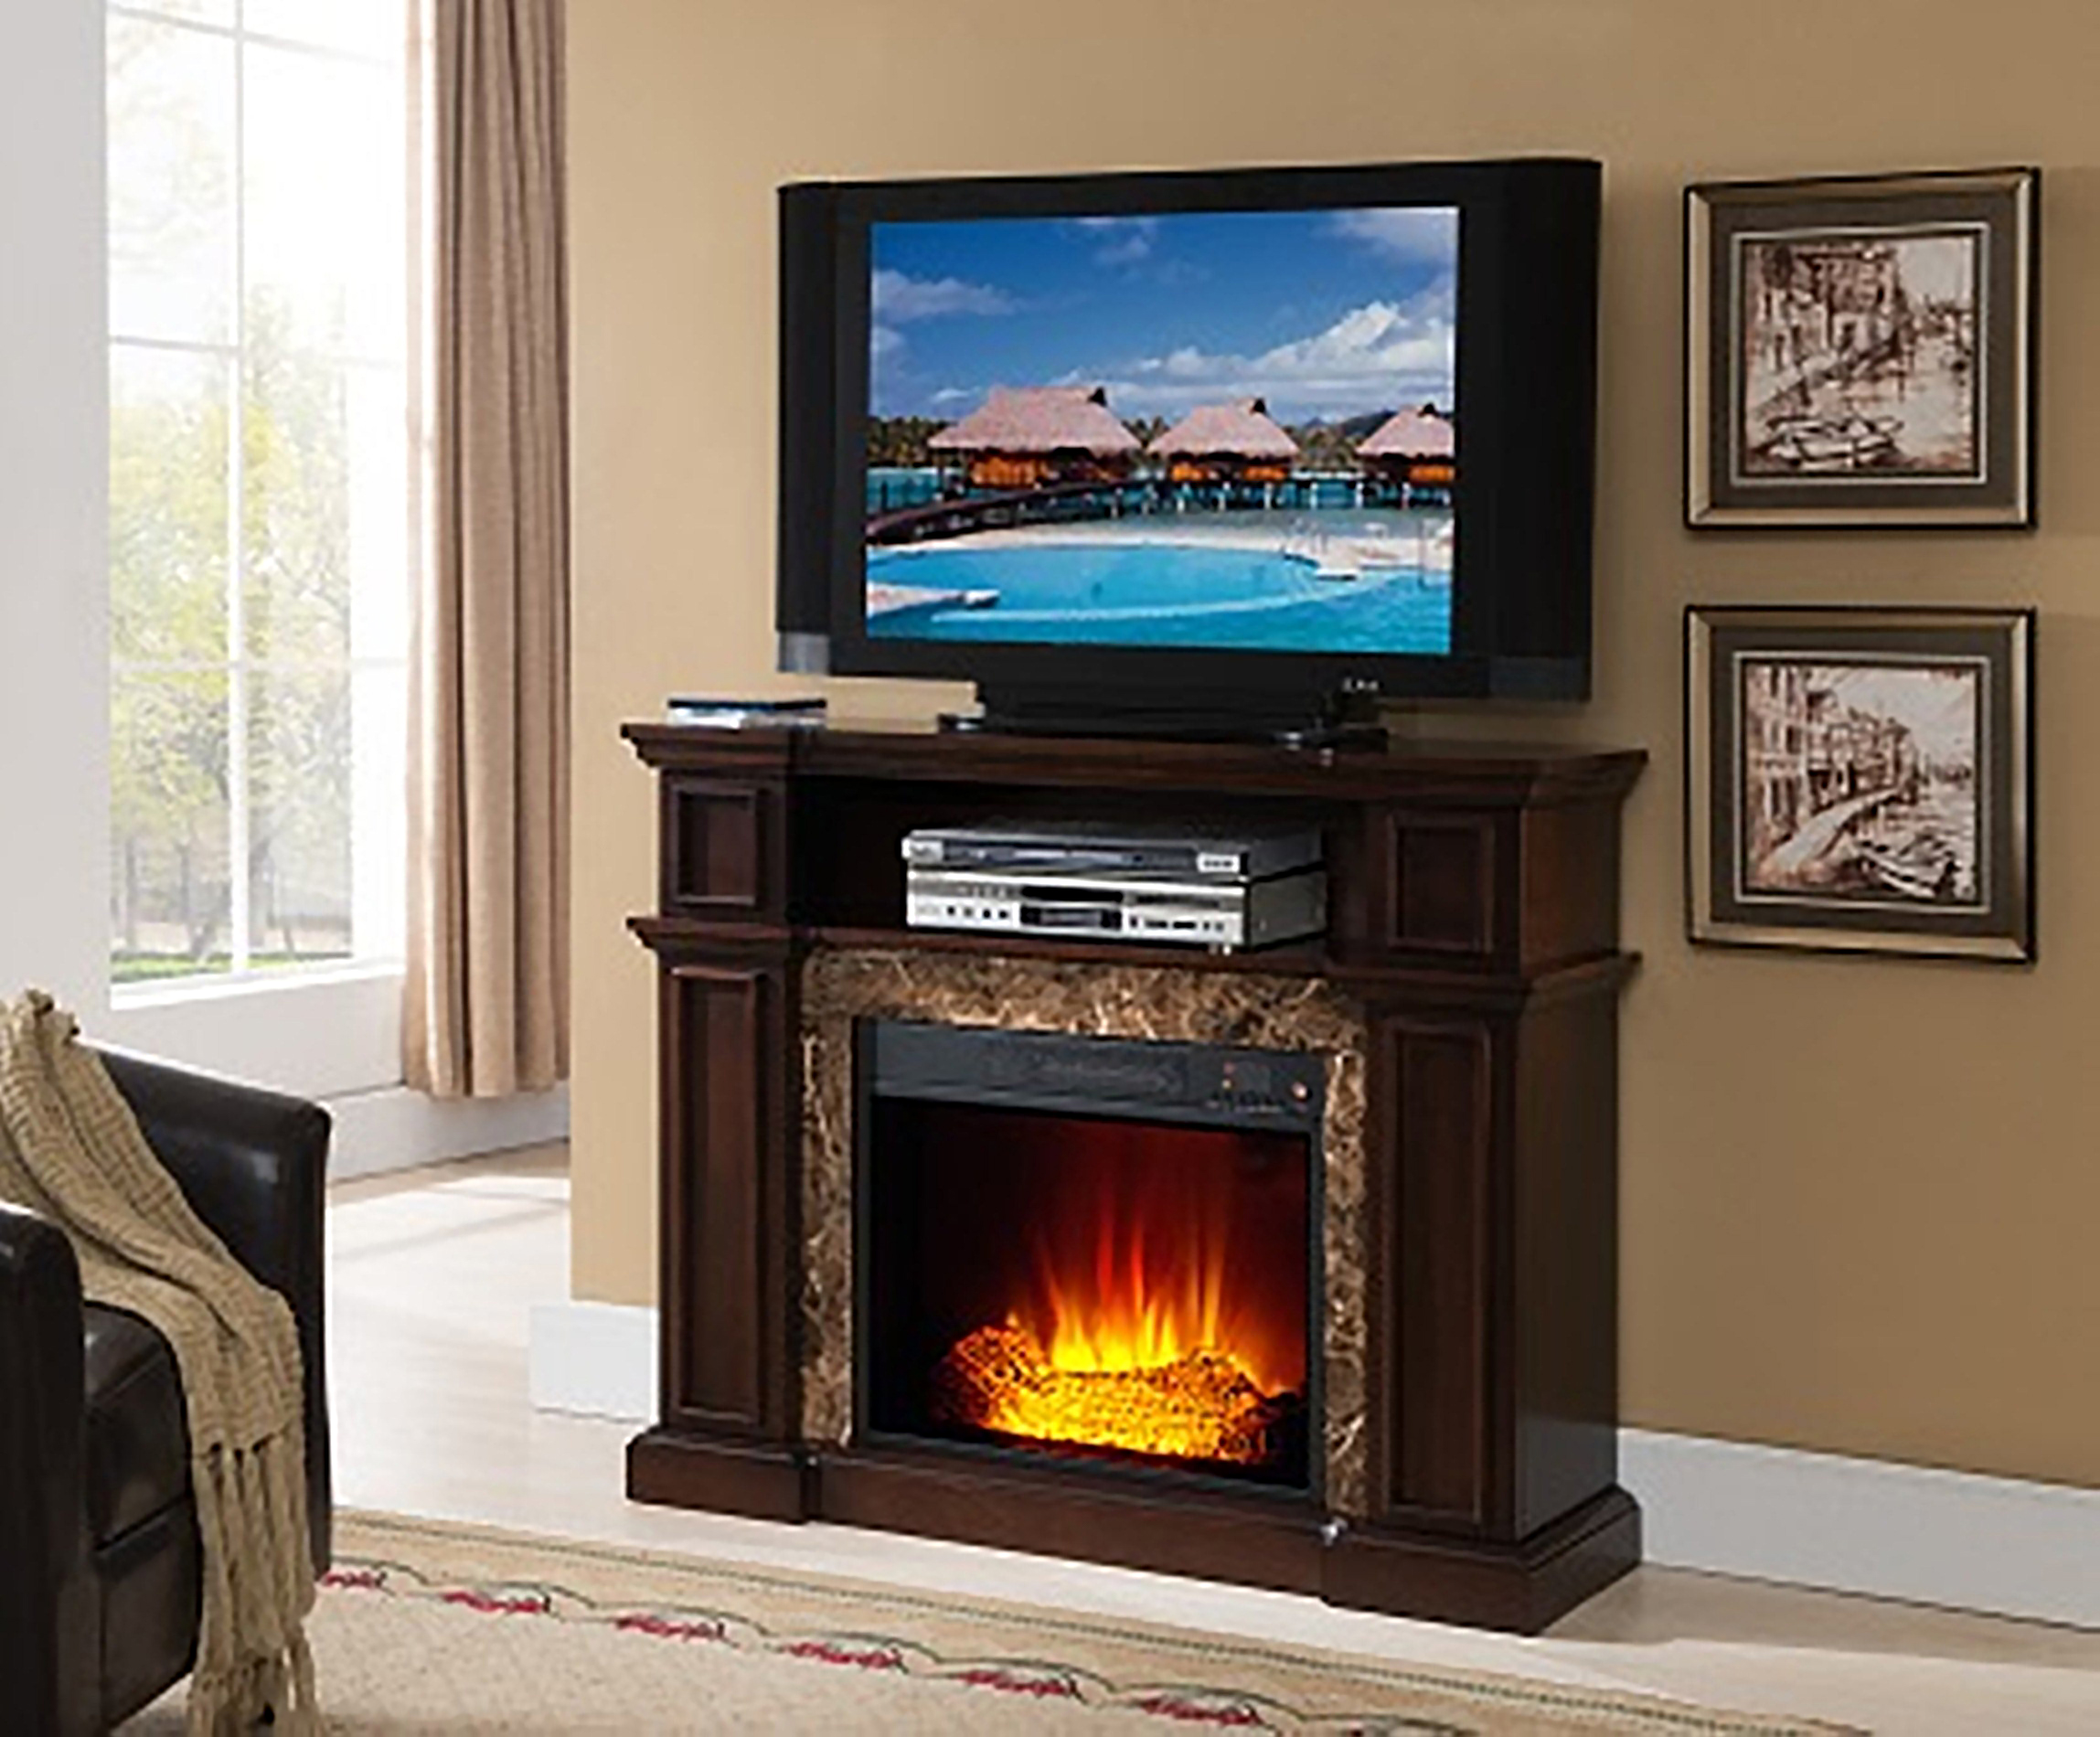 Shop for a Crawford Faux Marble Fireplace (B0014B) at Sears Outlet today! We offer low prices and great service.